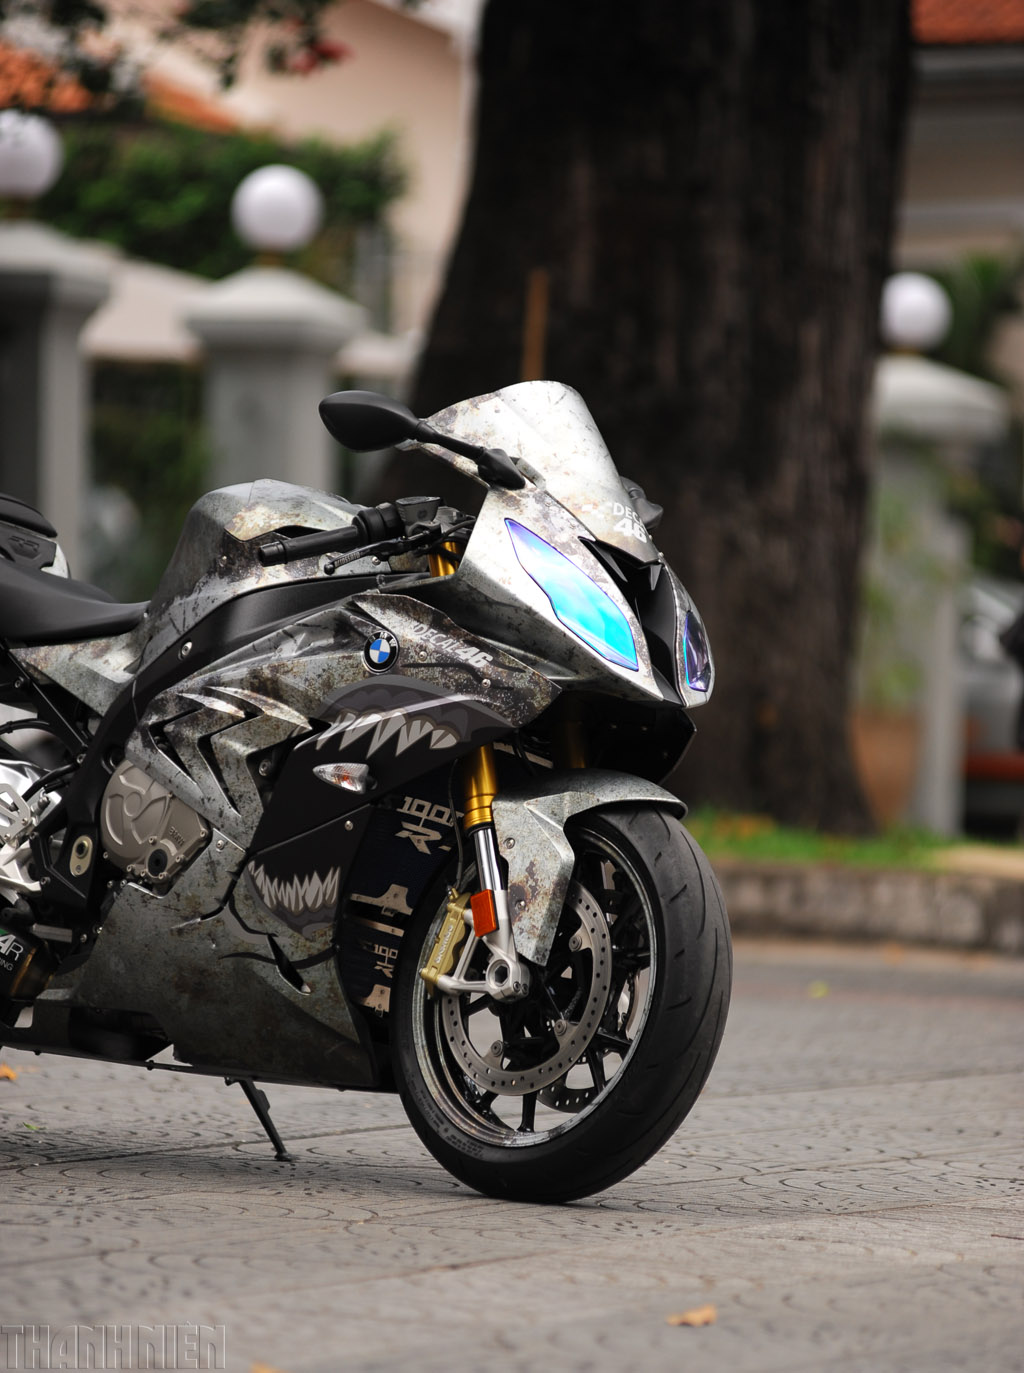 Mobile wallpaper: Bmw S1000Rr, Sports, Motorcycle, Motorcycles, Bike, Bmw,  81531 download the picture for free.